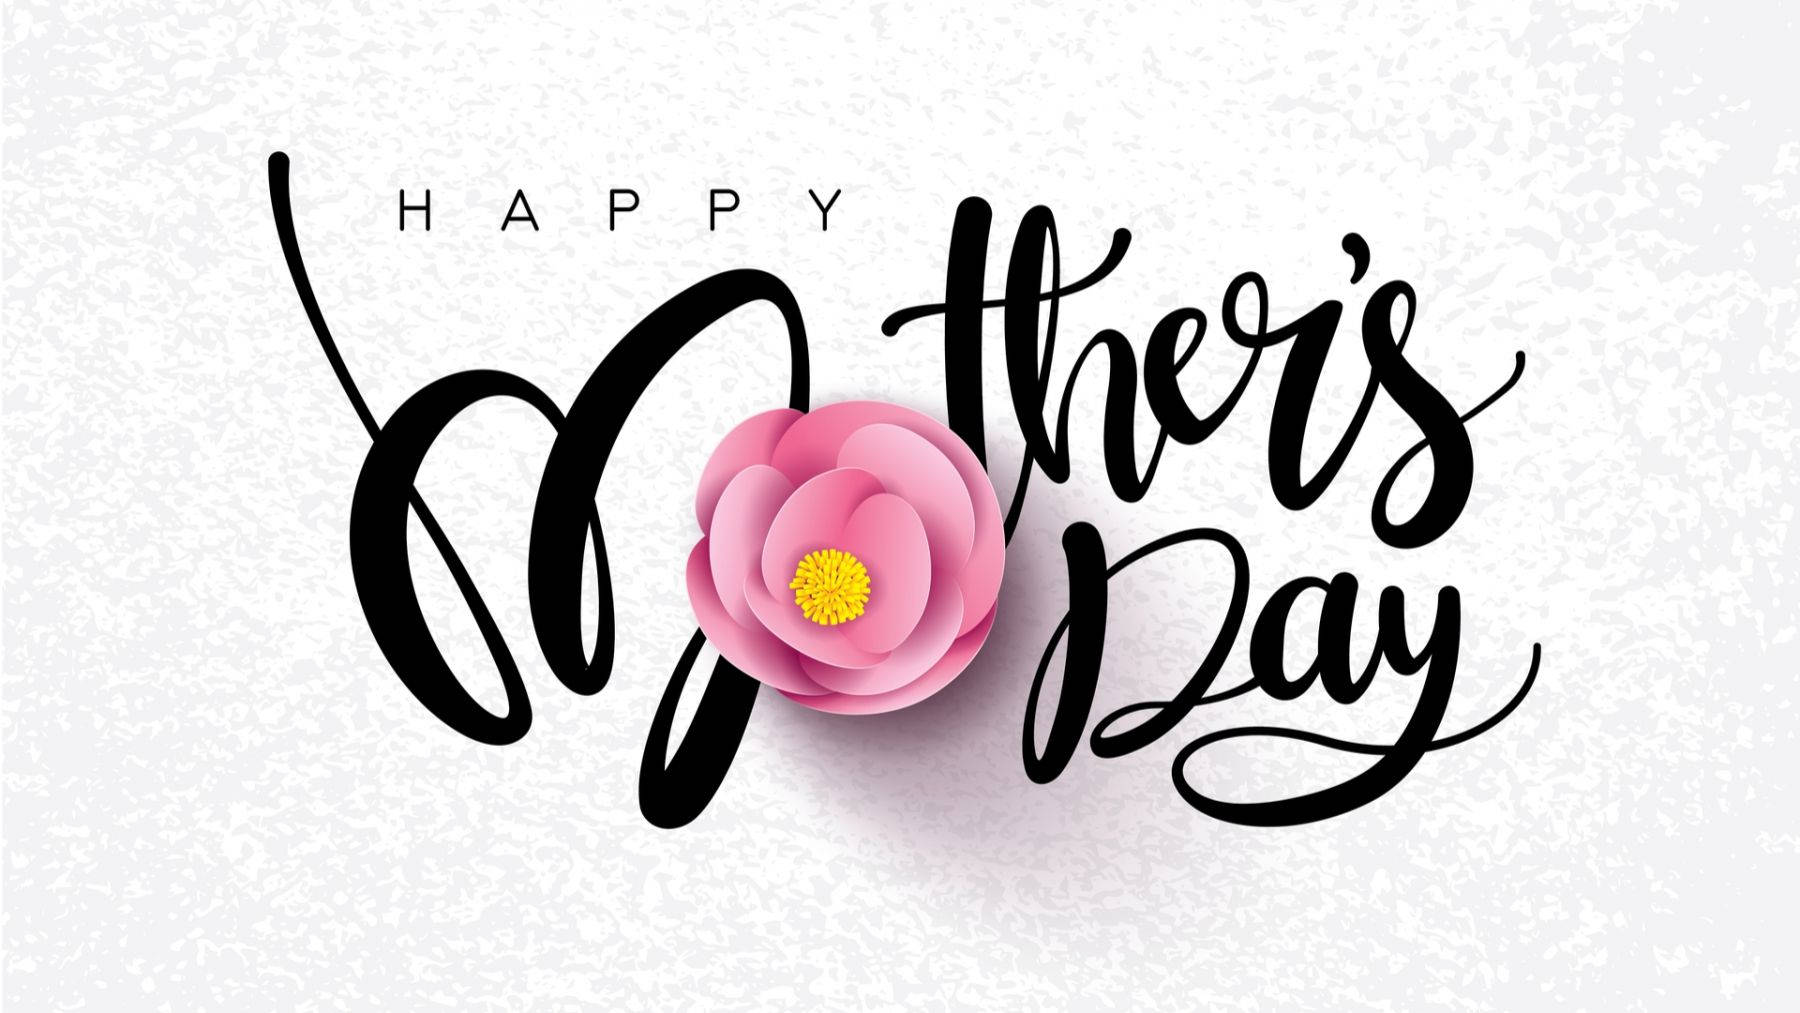 Celebrate Mom This Mothers Day - Wish Her A Happy Mothers Day With This Sparkley Card Wallpaper